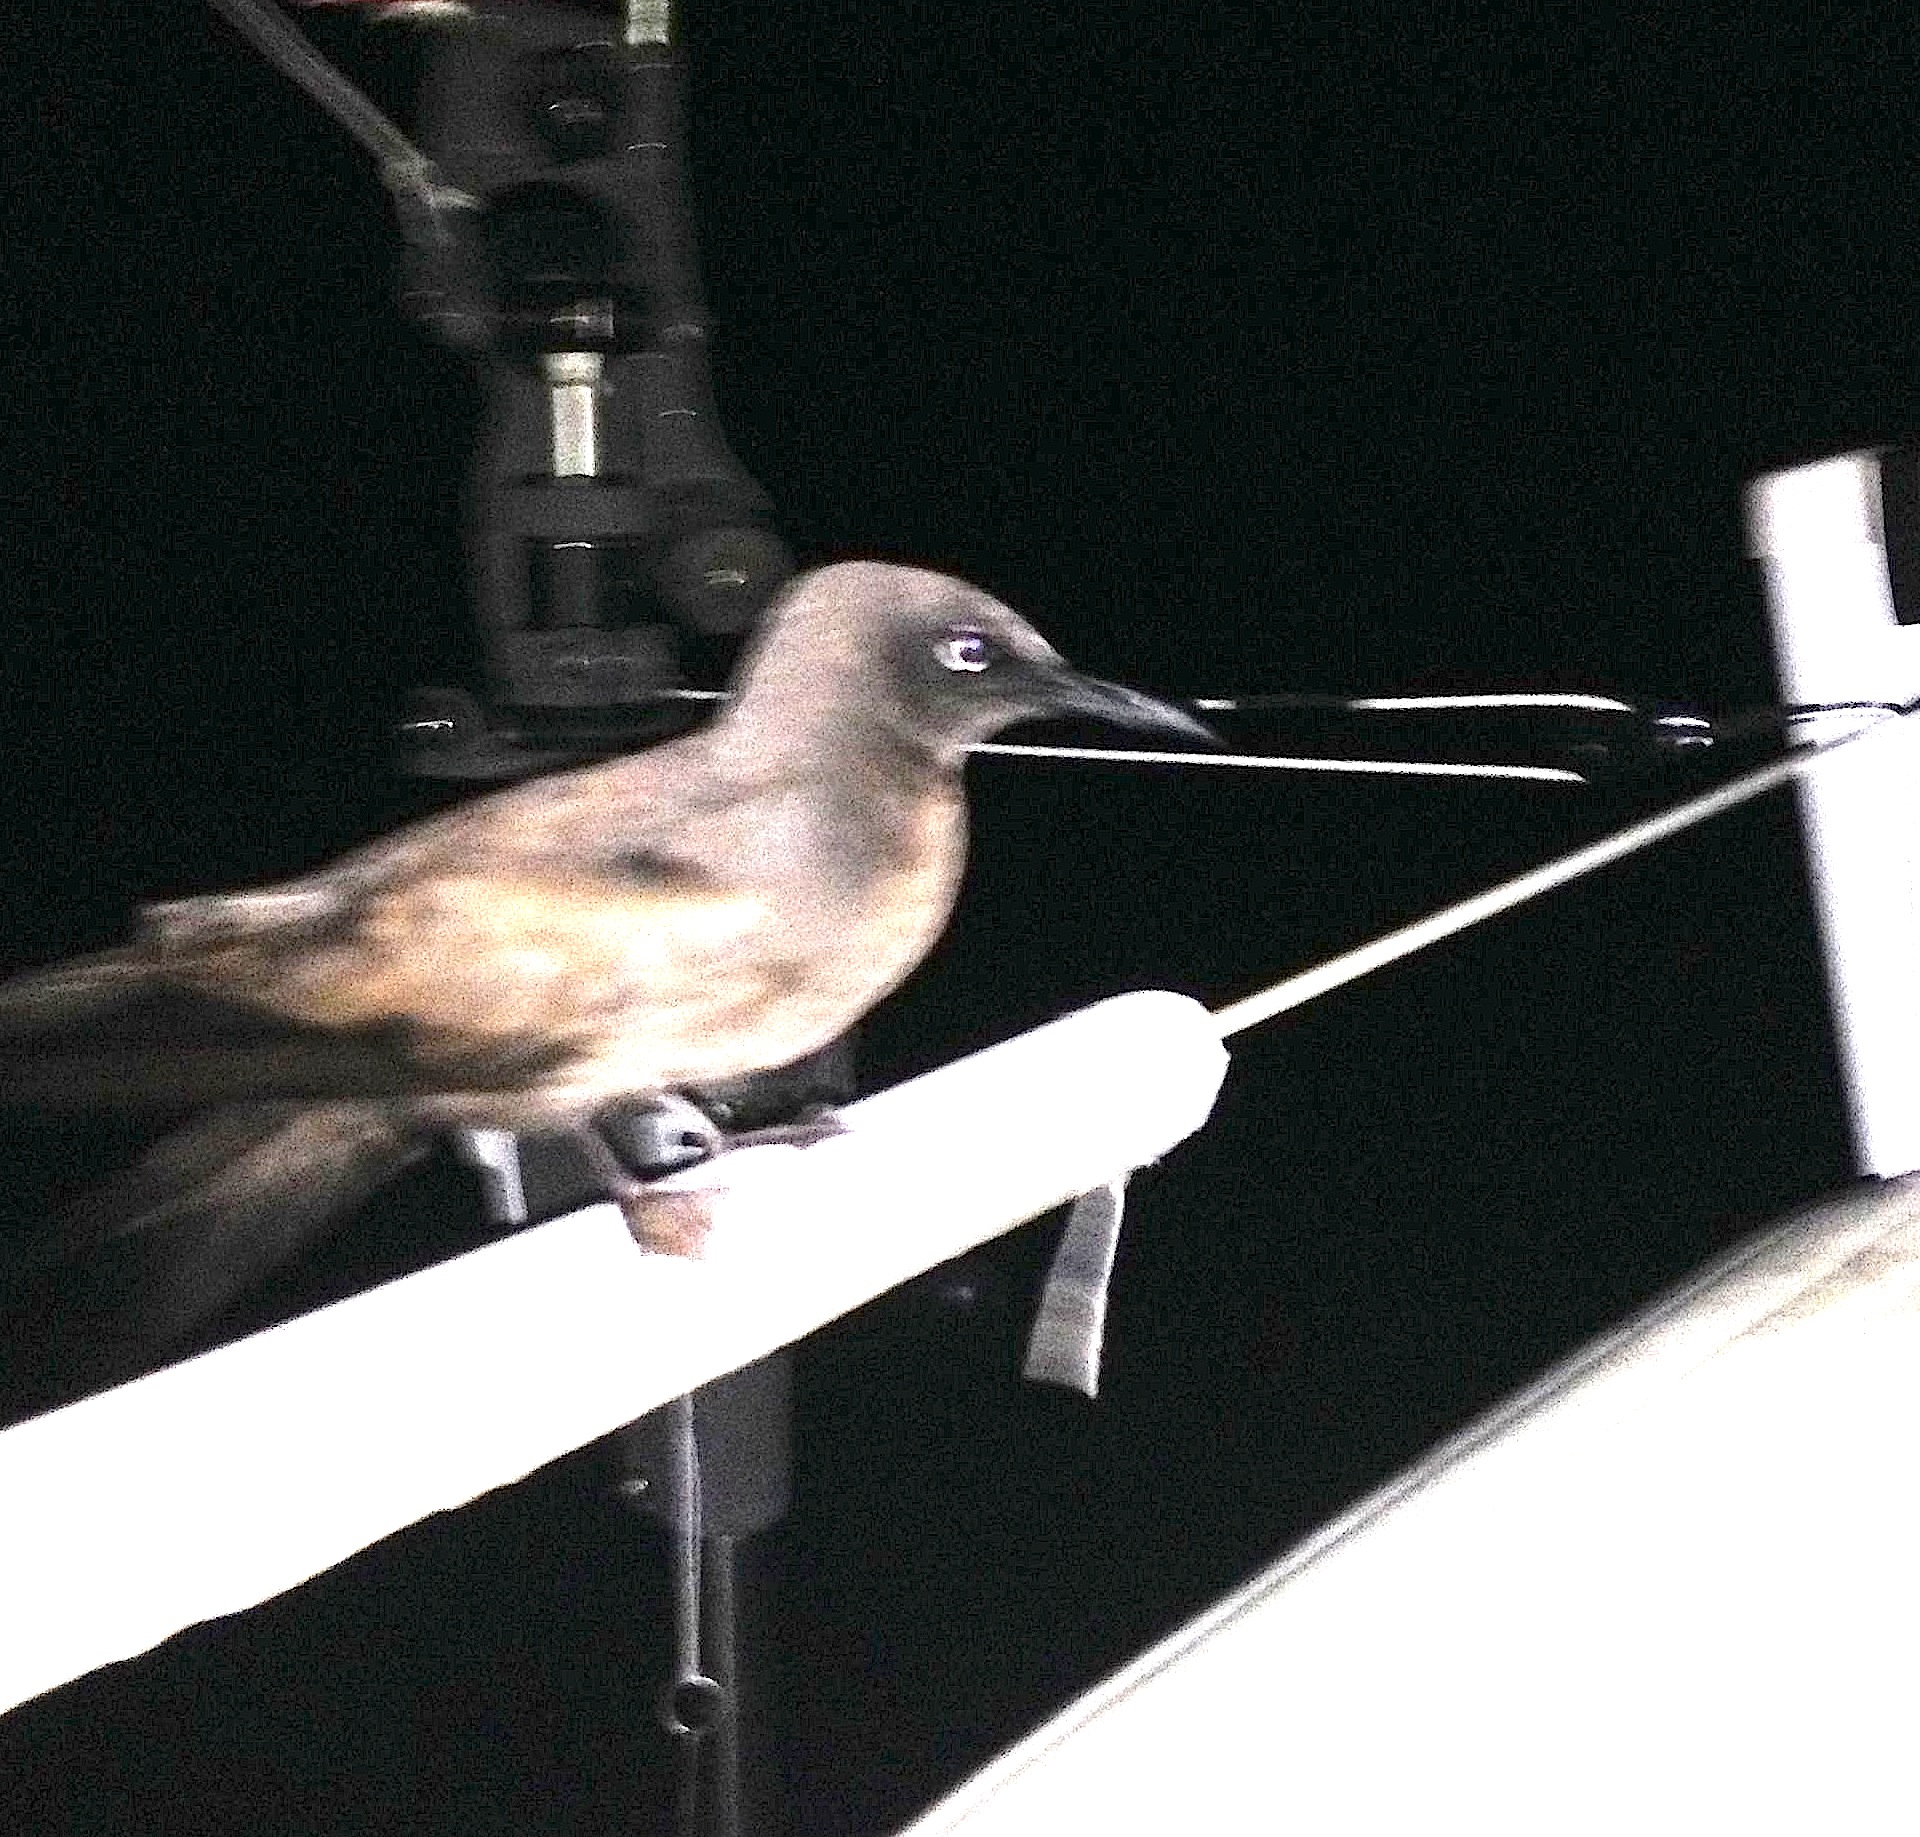 12. Jeff took this great photo while on his night watch. This is the third type of bird which rested on Joyful during this circumnavigation! You can see this bird's sharp beak and webbed feet as it rested on the Joyful's stern near the helmsman's seat.